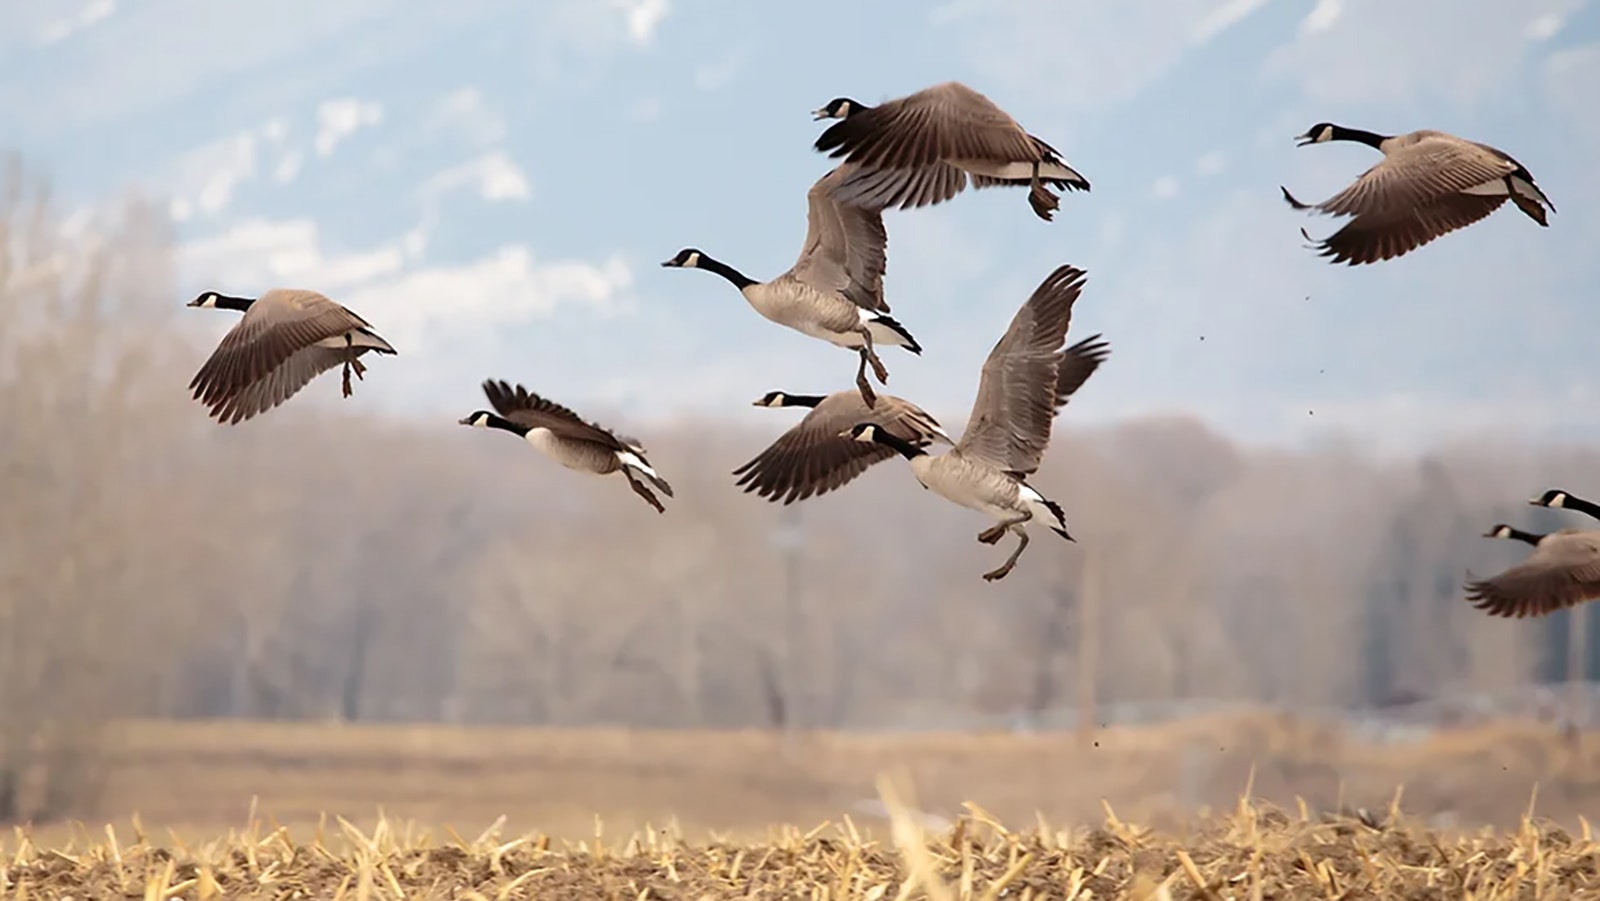 Even though Wyoming as a whole isn’t really known for bird hunting, Goshen County has some exceptional goose hunting and hosts the annual 2Shot Goose Hunt.